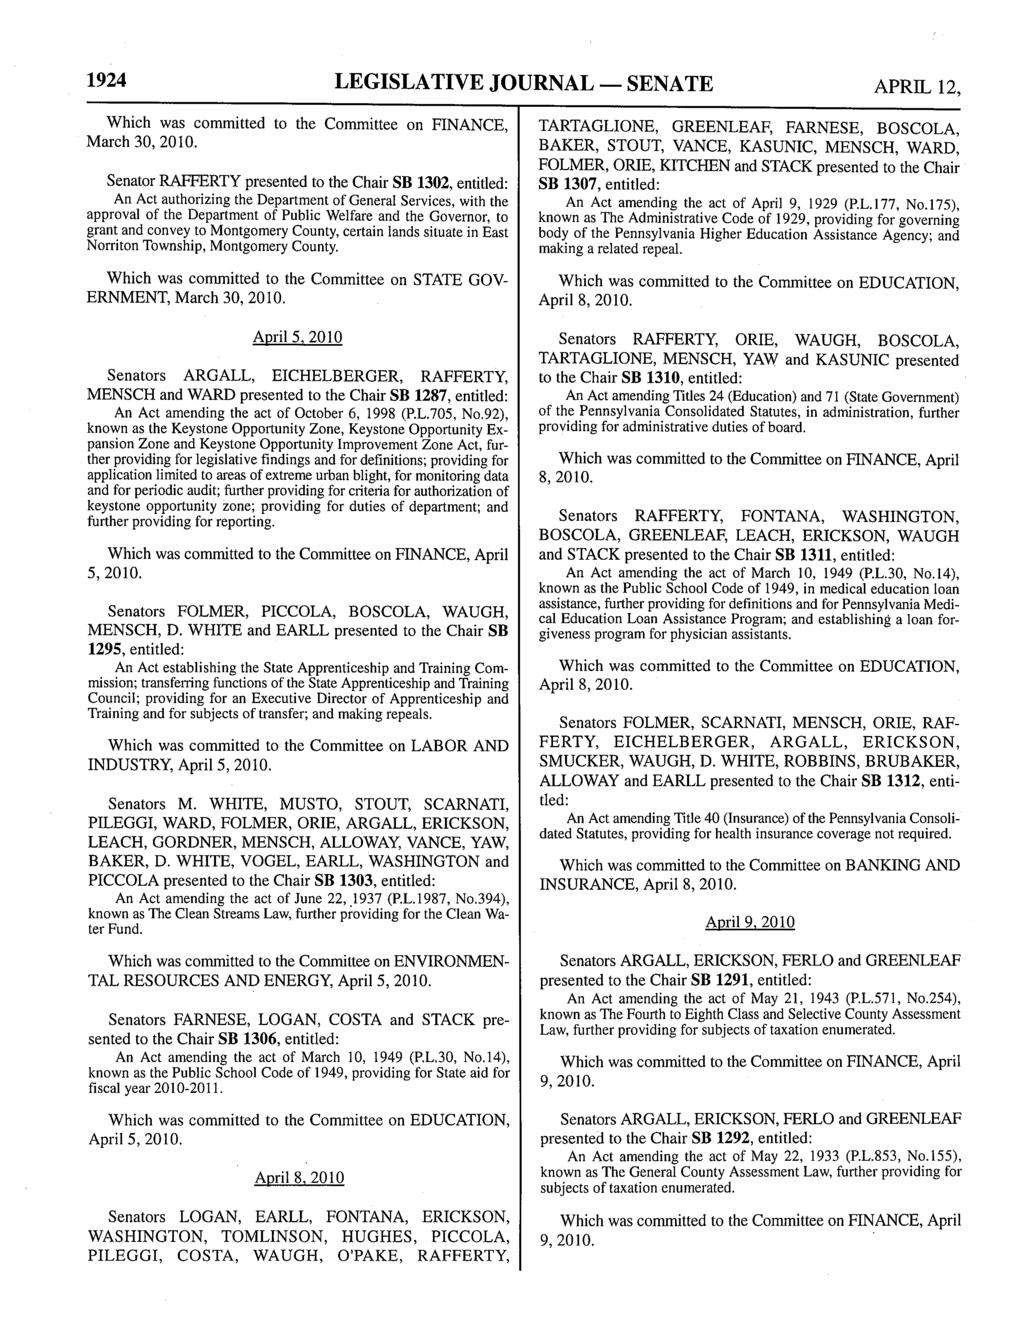 1924 LEGISLATIVE JOURNAL - SENATE APRIL 12, Which was committed to the Committee on FINANCE,.